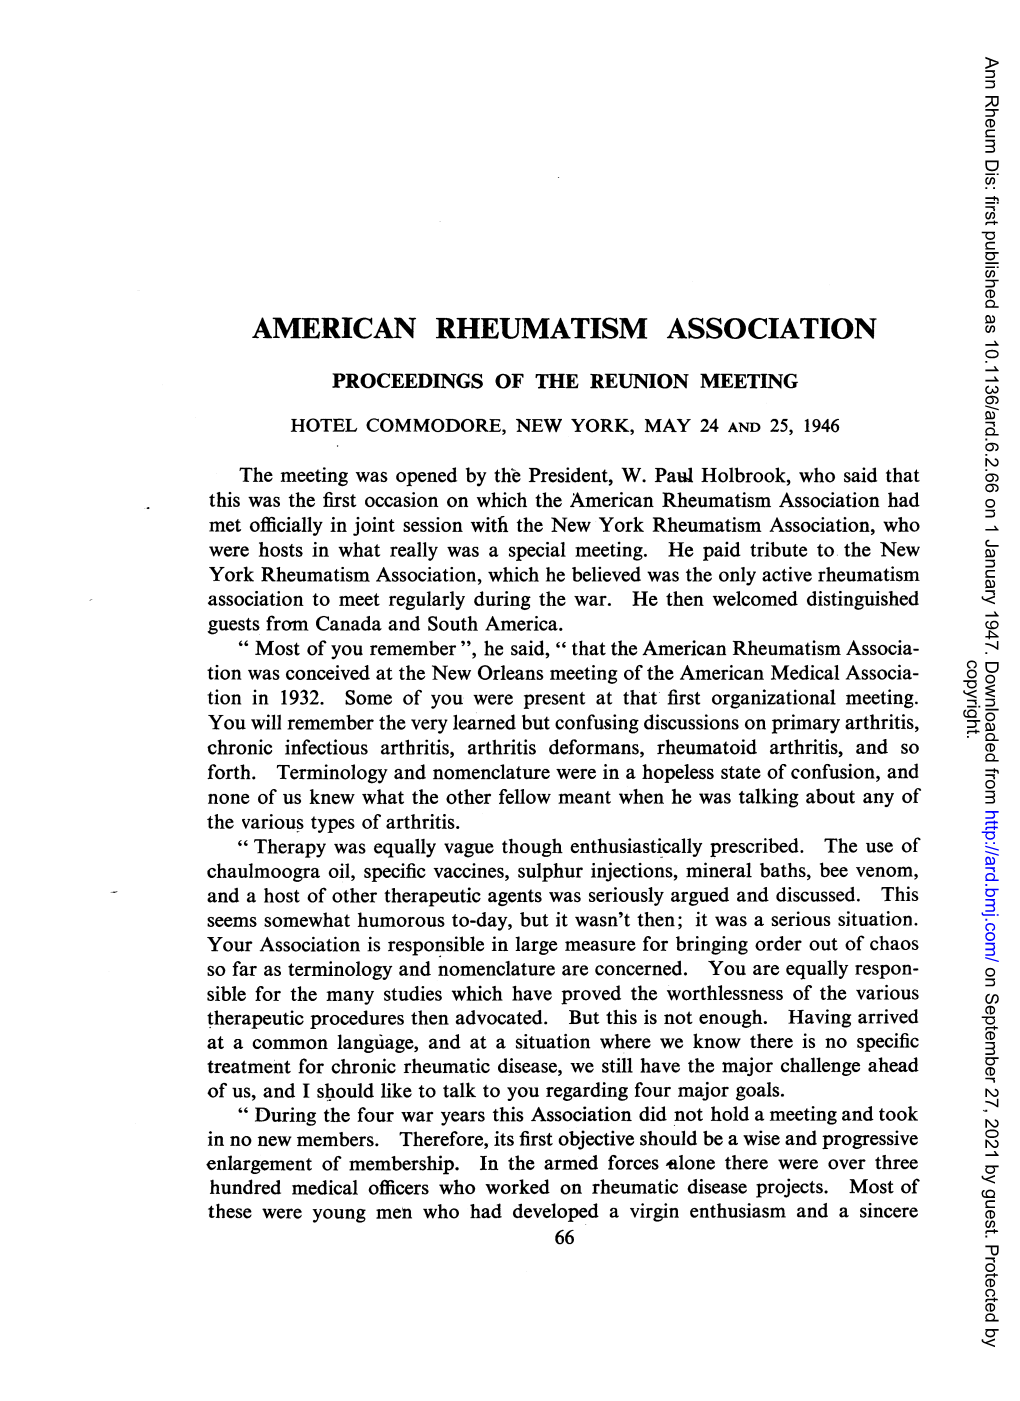 American Rheumatism Association Proceedings of the Reunion Meeting Hotel Commodore, New York, May 24 and 25, 1946